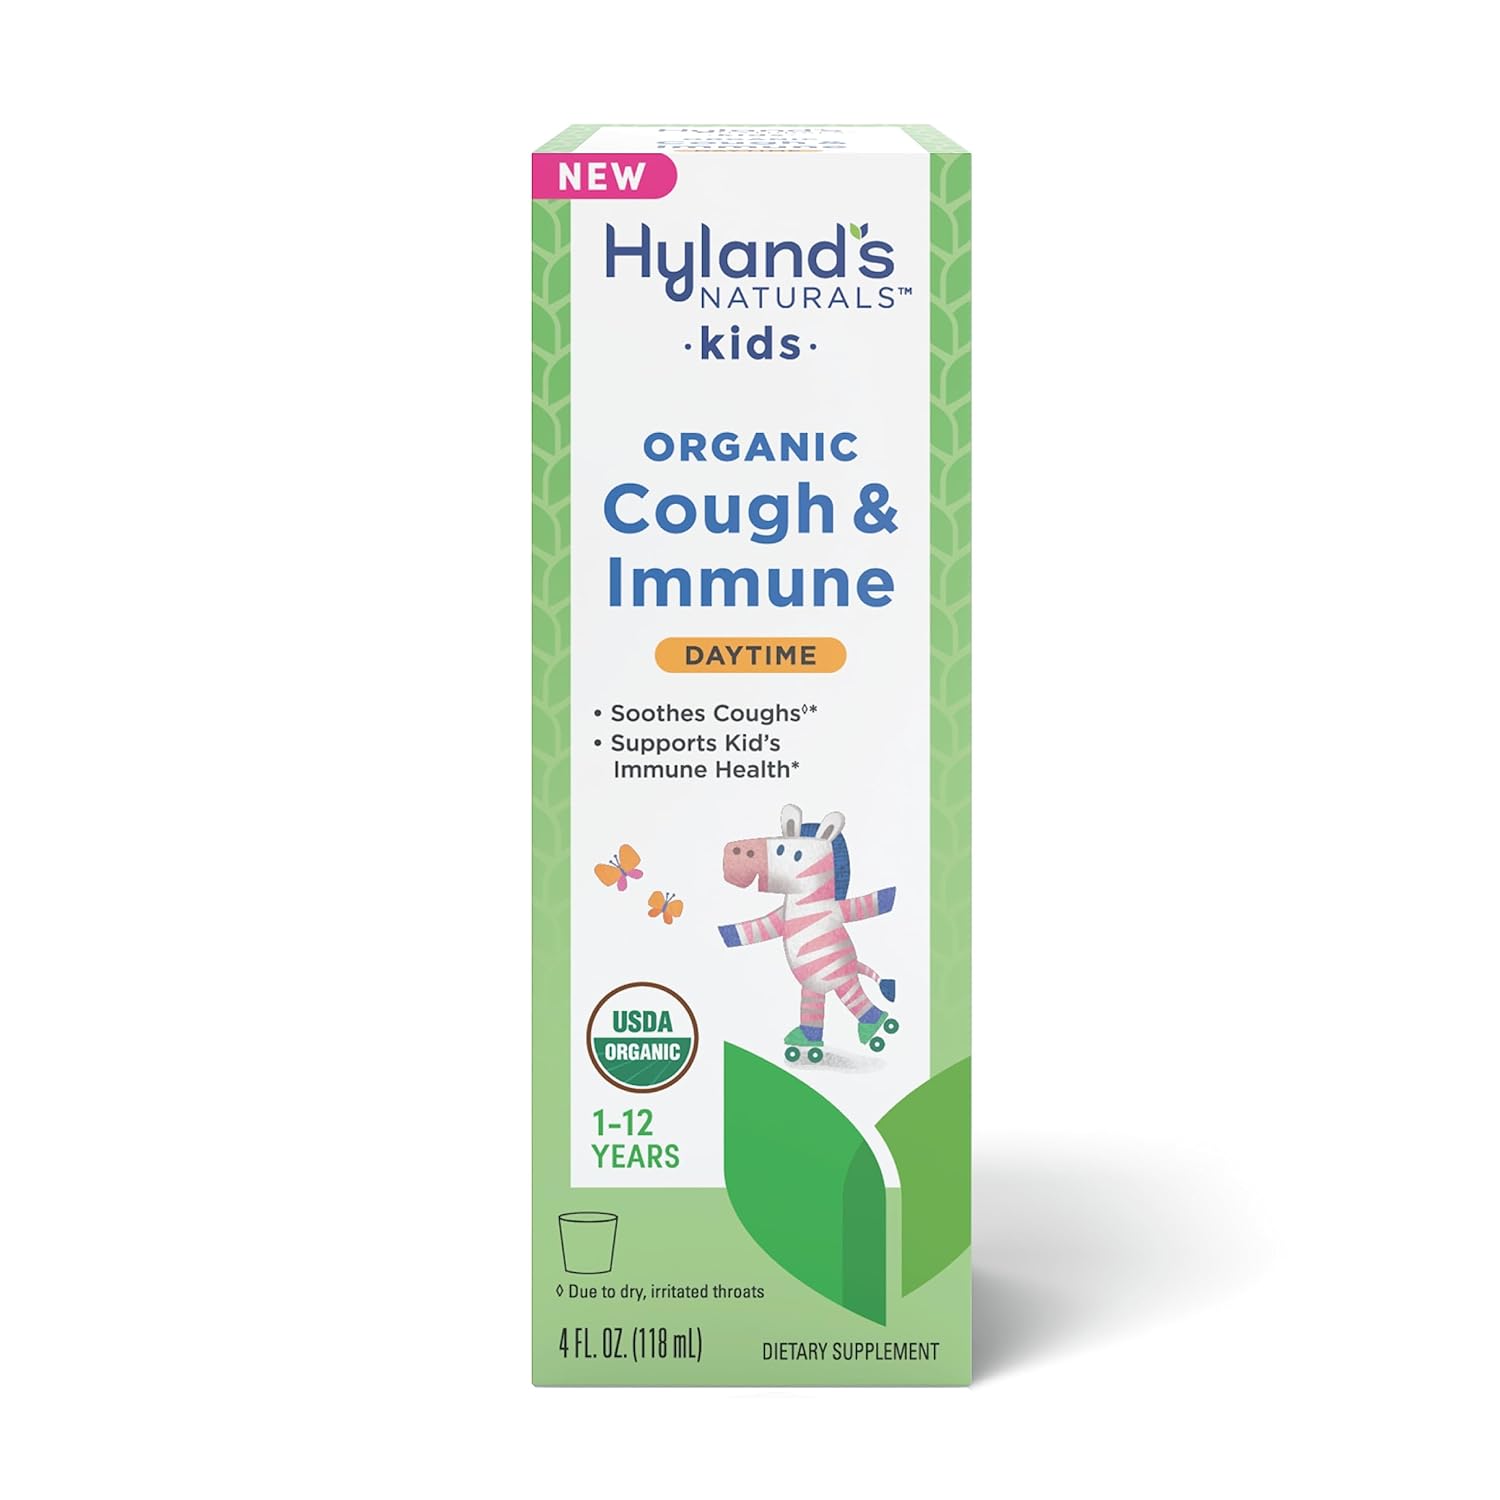 Hyland's Naturals Kids Daytime Organic Cough Syrup & Immune Support with Agave, Elderberry & Pomegranate - Soothes Cough and Cold, & Supports Immunity - 4 Fl. Oz